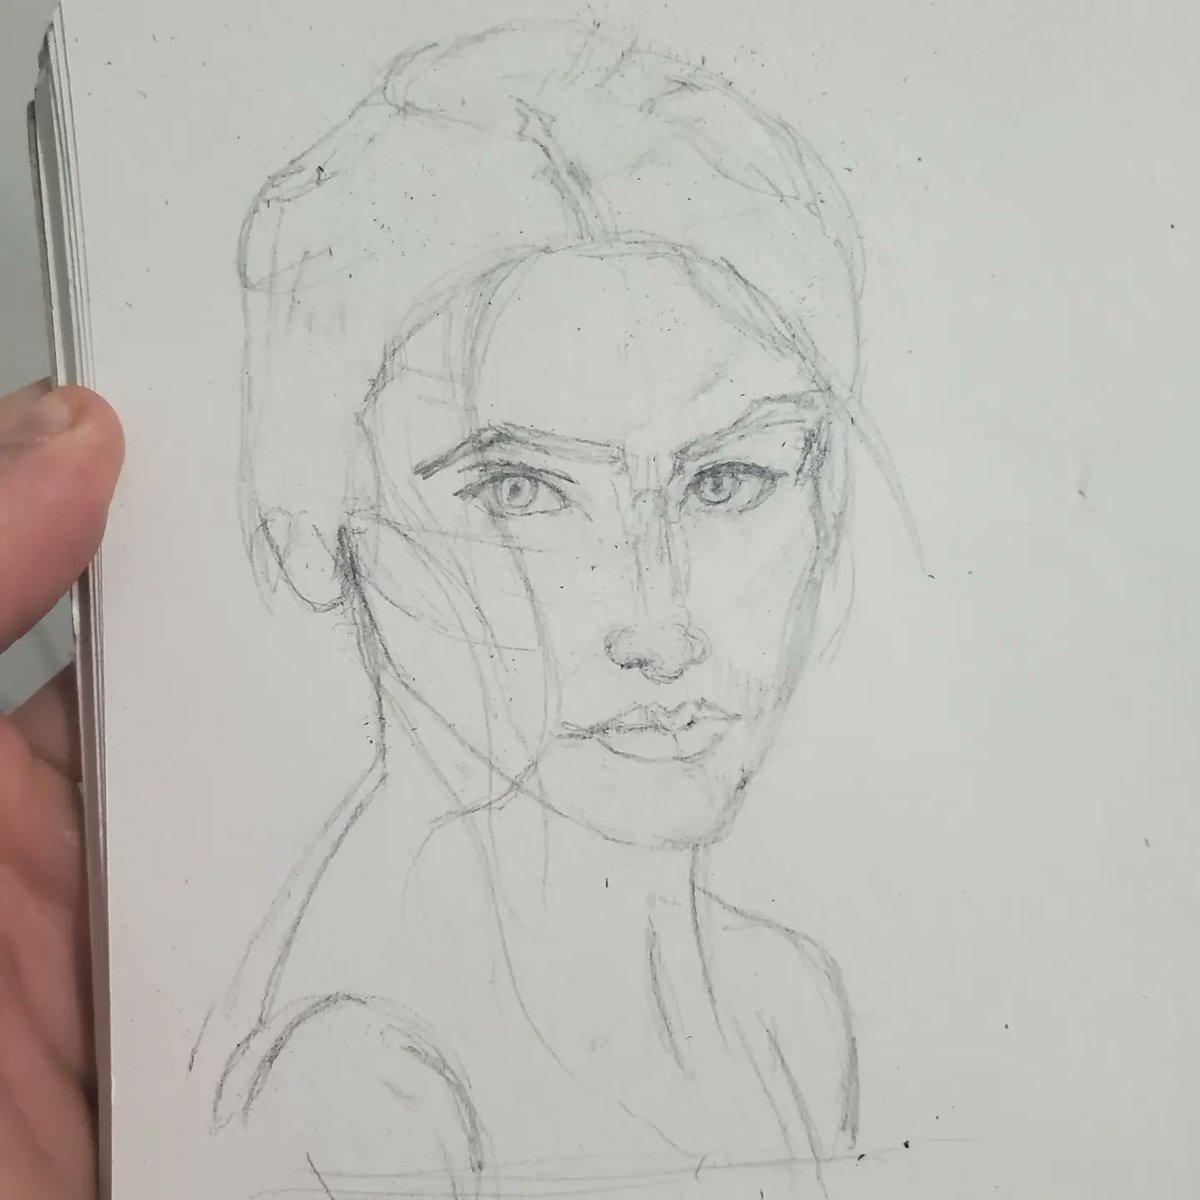 So today I did back muscle studies and after that I have also did a sketch of a face that I'm planning to finish. 

I was pretty tired today so I didn't do more and took like 2 or 3 naps idk why I was so tired 

#anatomystudy #backmuscle #sketch #portraitsketch  #drawing